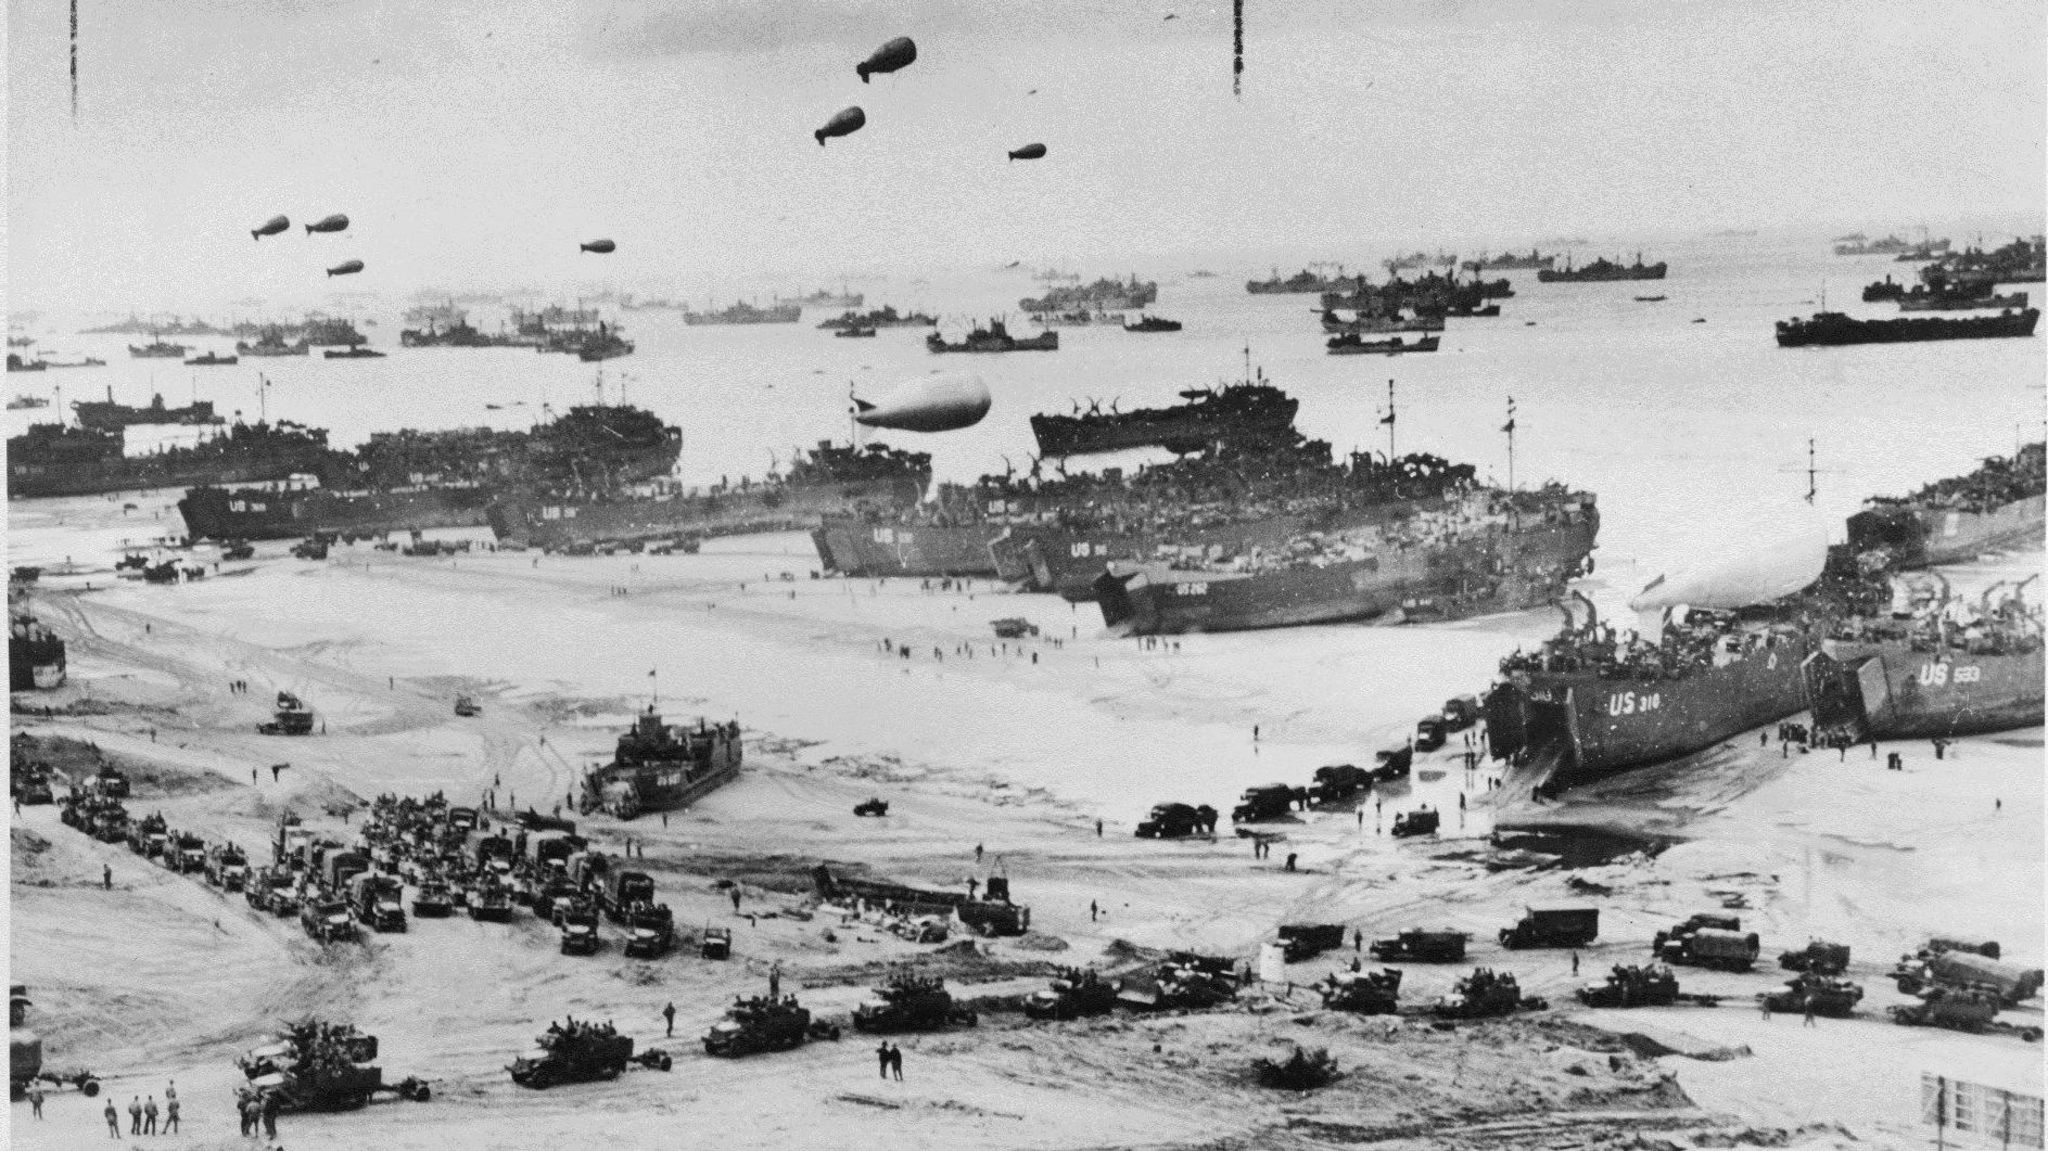 A black and white photo of allied forces landing on Normany beaches, including tanks and ships